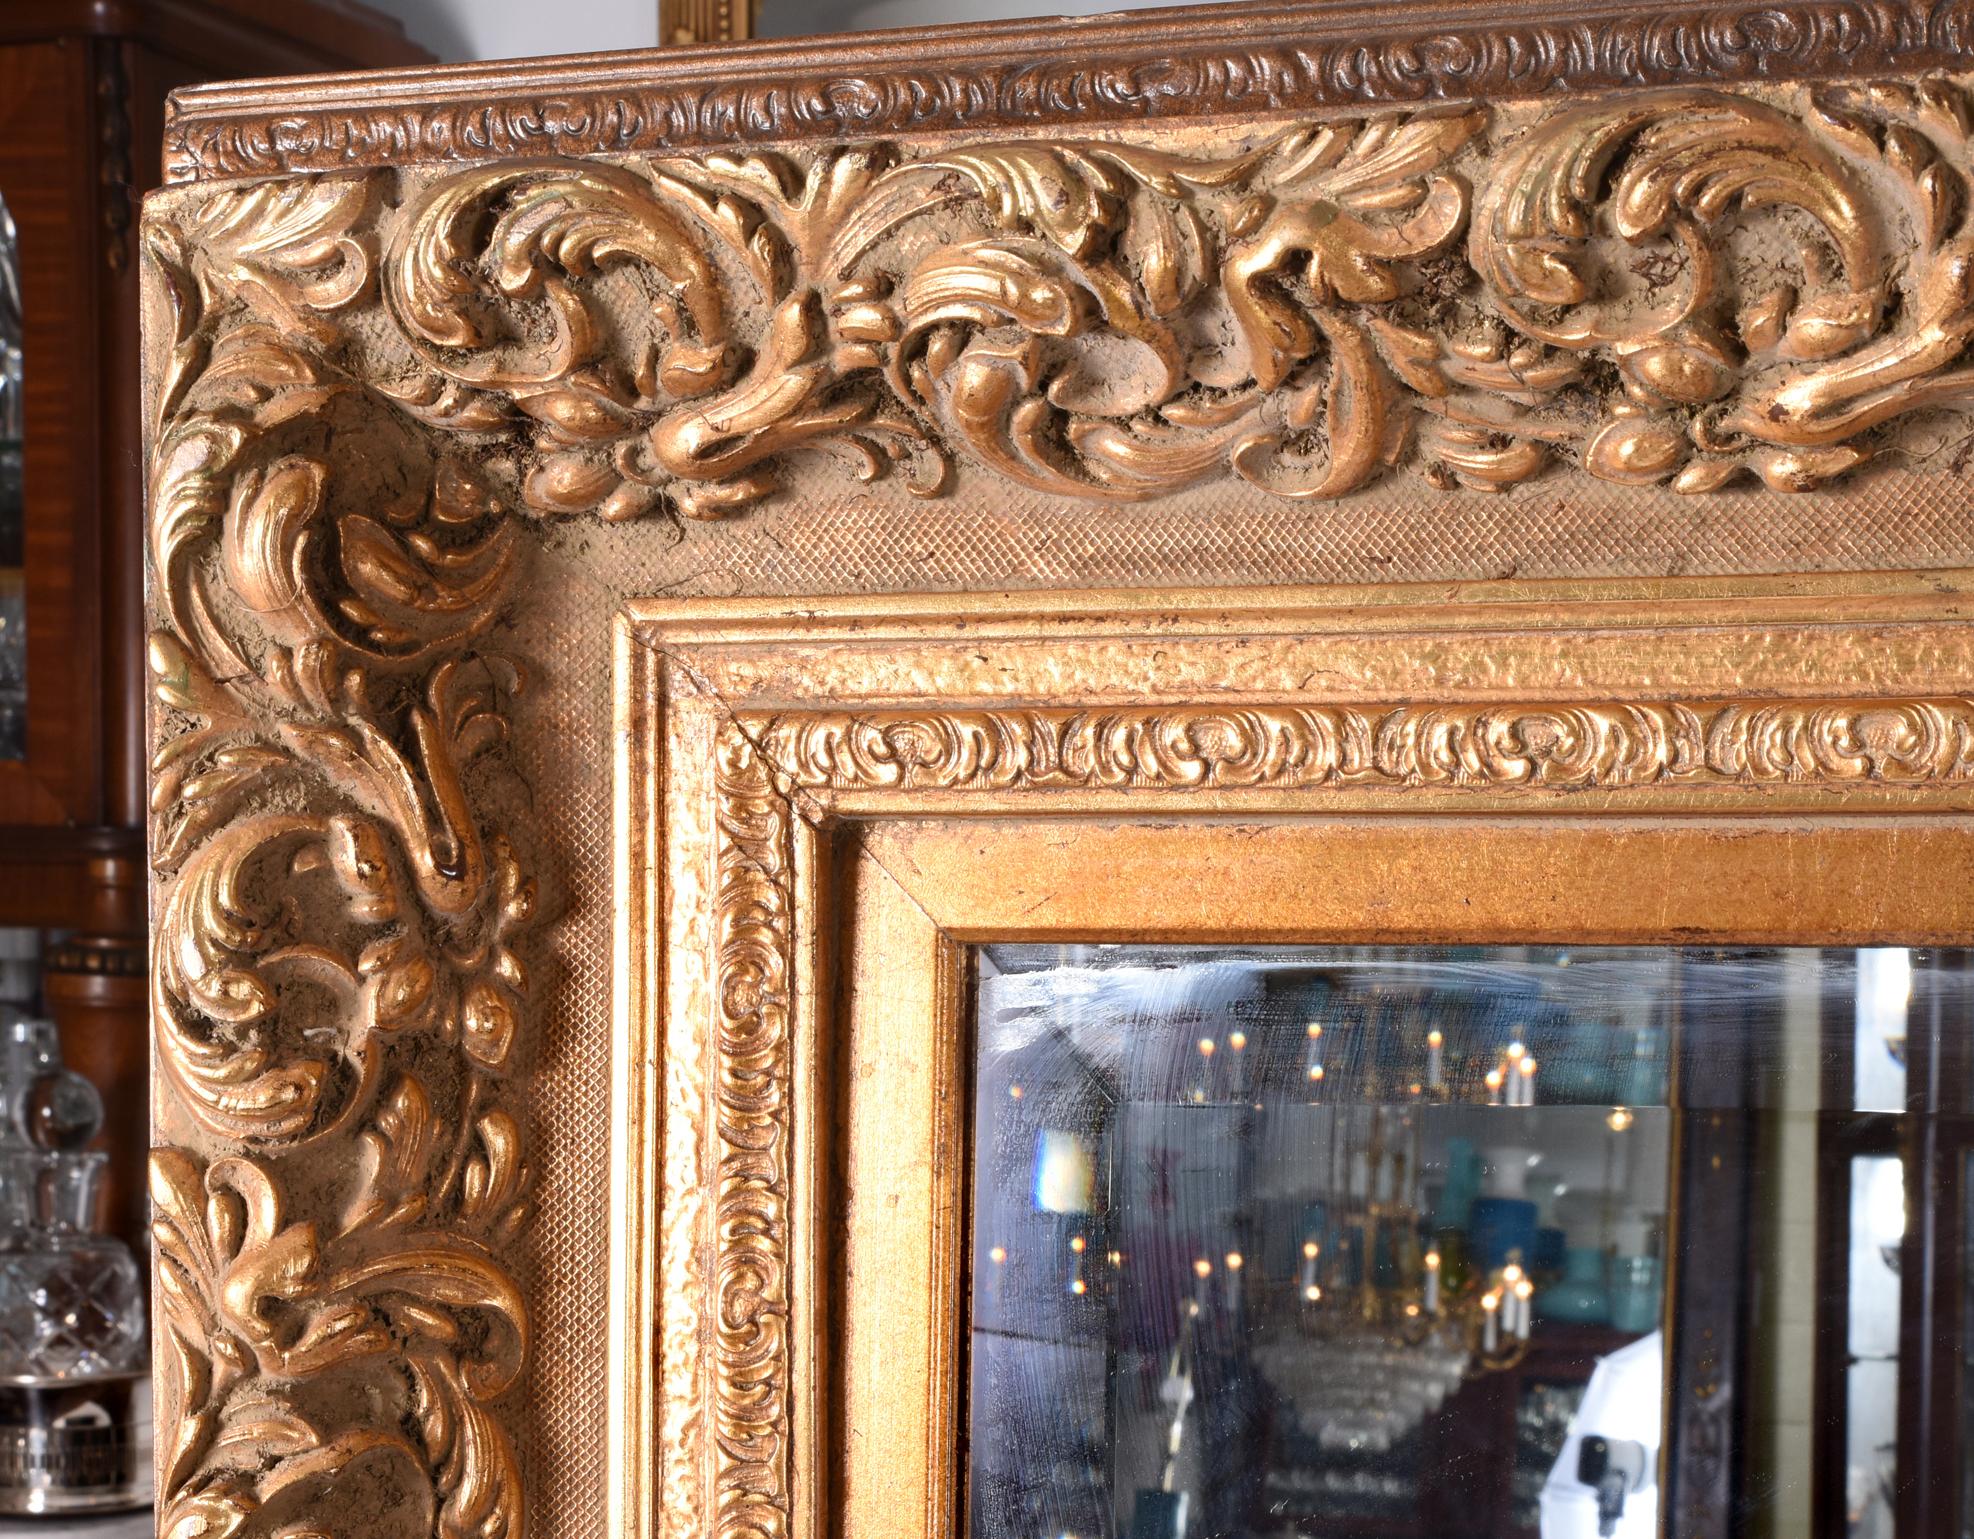 Large and elegant beveled giltwood frame fire mantel (fireplace) hanging wall mirror. This large beveled mirror is just beautiful and in excellent condition. The mirror measure about 62 inches length x 50 inches width x 4.5 inches deep.

 